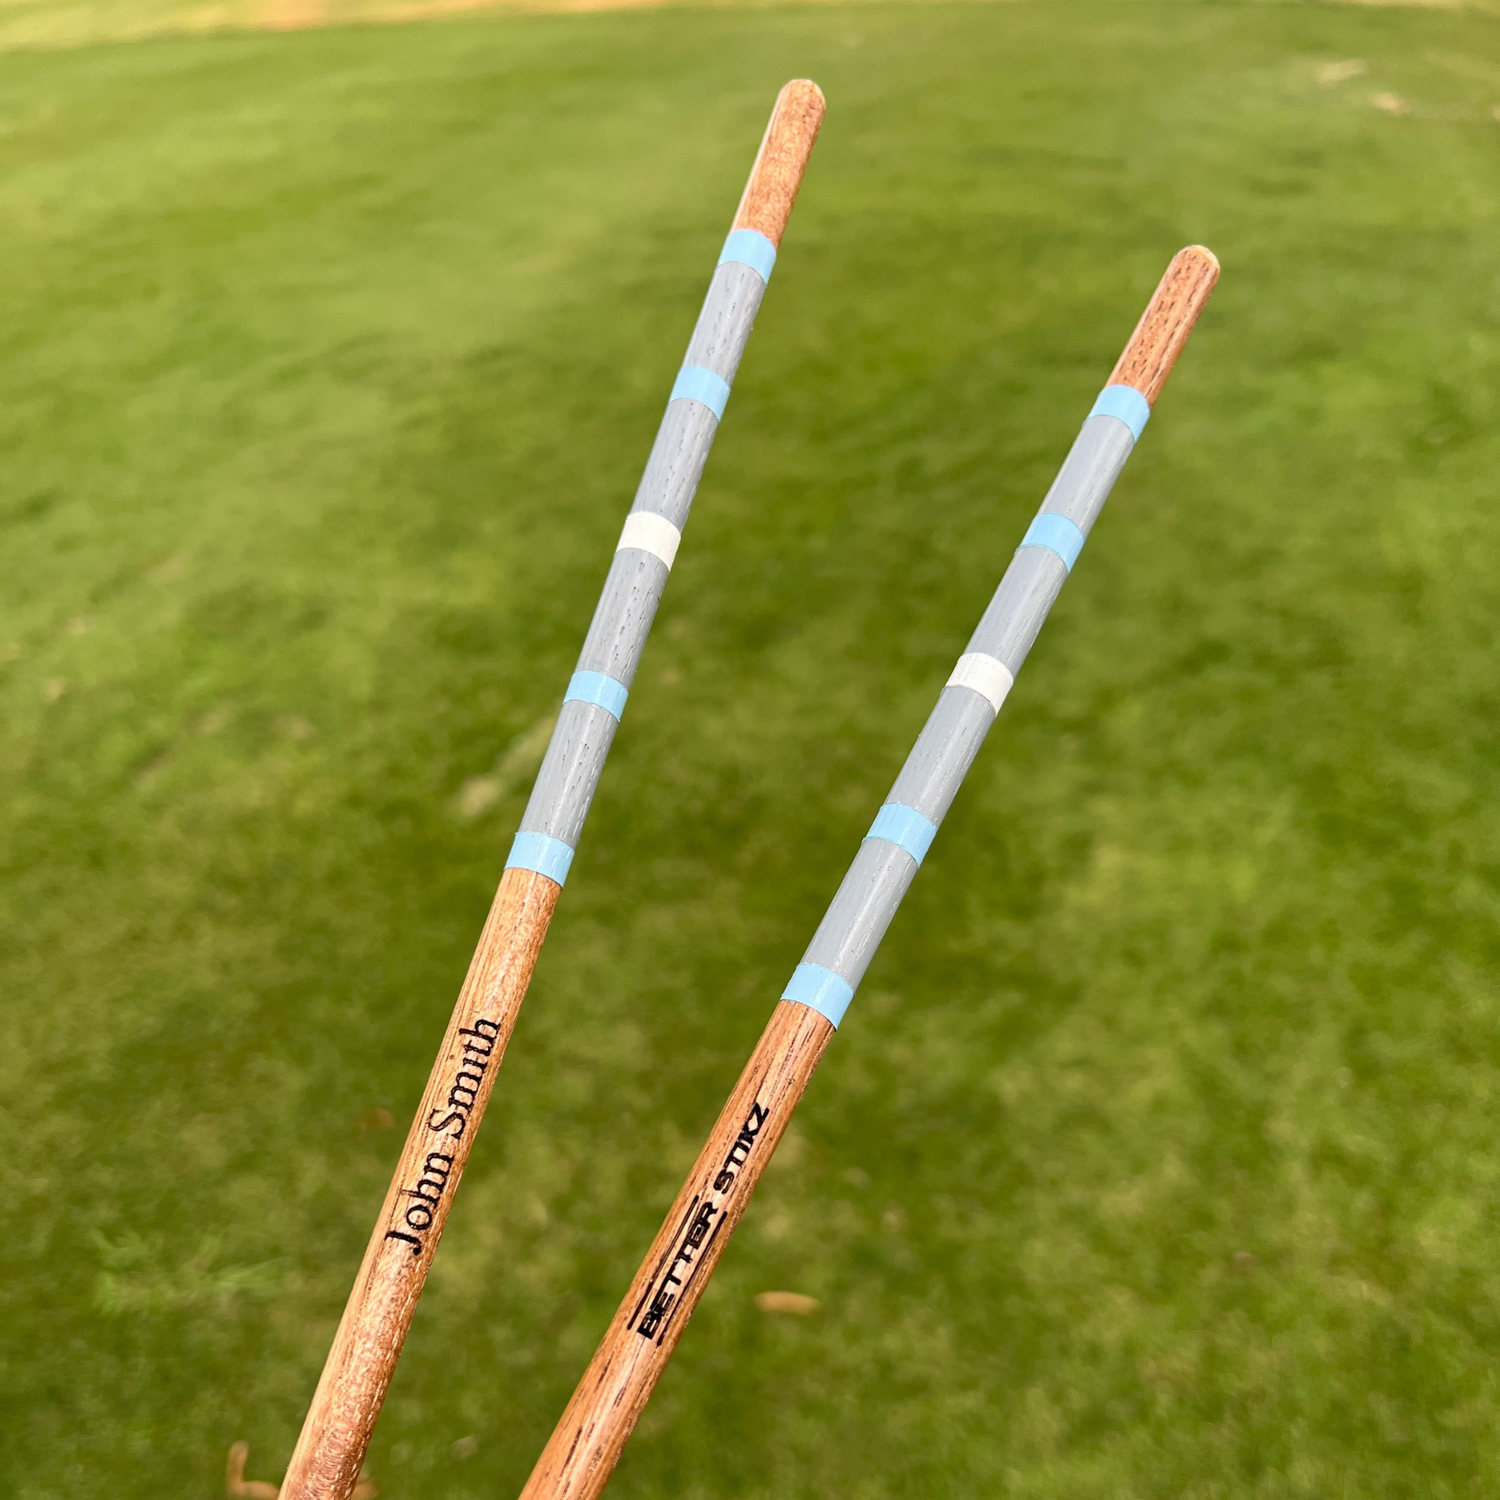 Hickory Alignment Sticks. Hickory Alignment Sticks are great for practicing the fundamentals of golf. Alignment Sticks provide great visuals for practicing golf correctly. Golf Alignment Sticks are great for all golf training. A great training aid. 